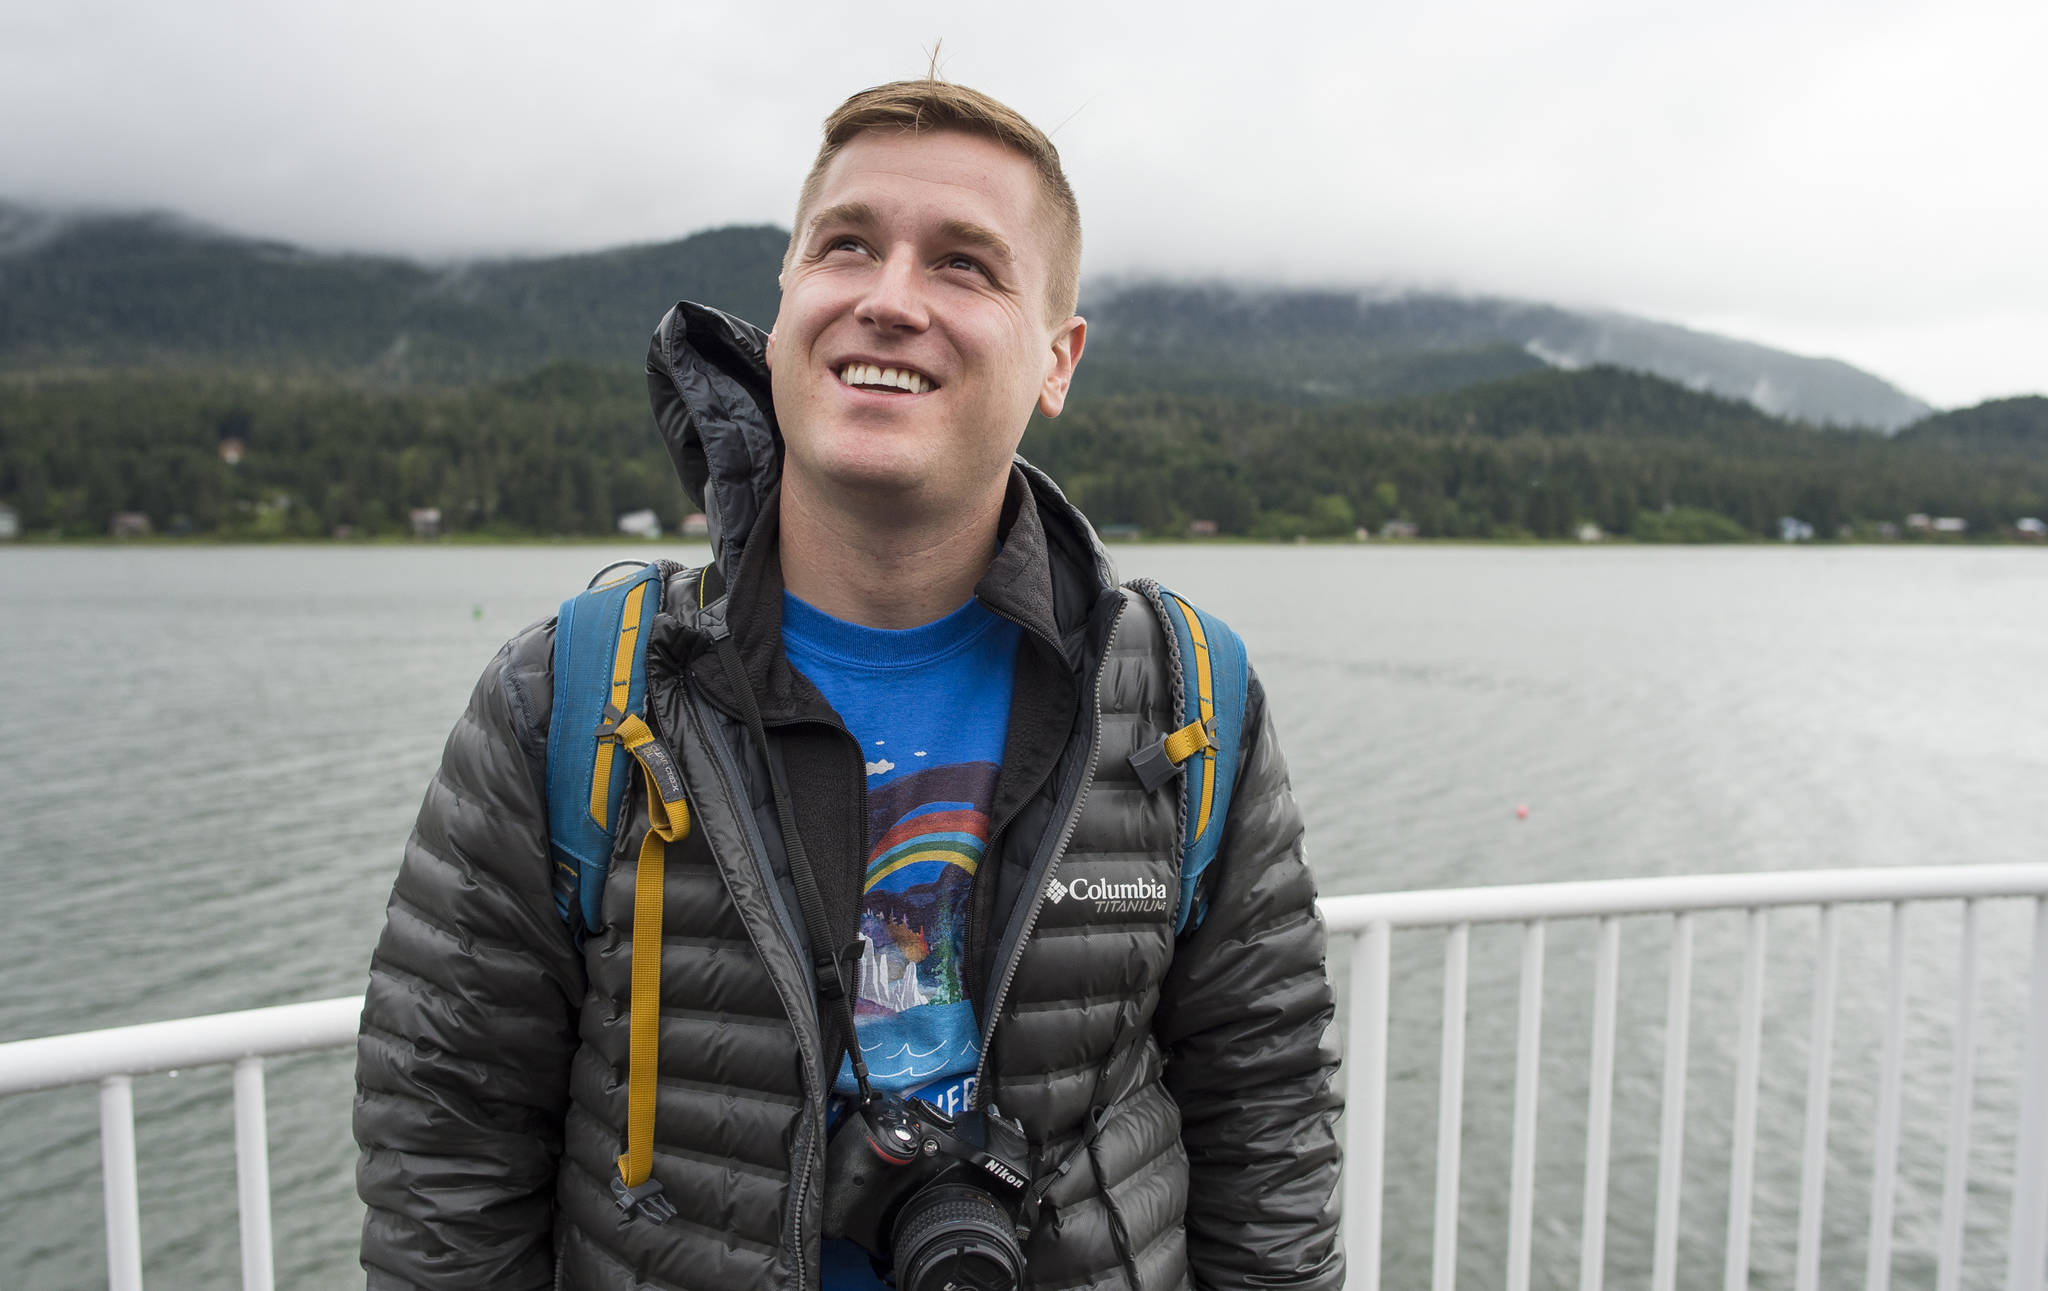 Mikah Meyer visits the Macaulay Salmon Hatchery during a stop in Juneau on Monday, May 28, 2018. Meyer plans visit all 417 National Park Service sites to honor his father who passed from cancer. Juneau will marks his first step in Alaska and the beginning of my Memorial Day to Labor Day summer visiting all 23 of Alaska’s NPS sites. (Michael Penn | Juneau Empire)